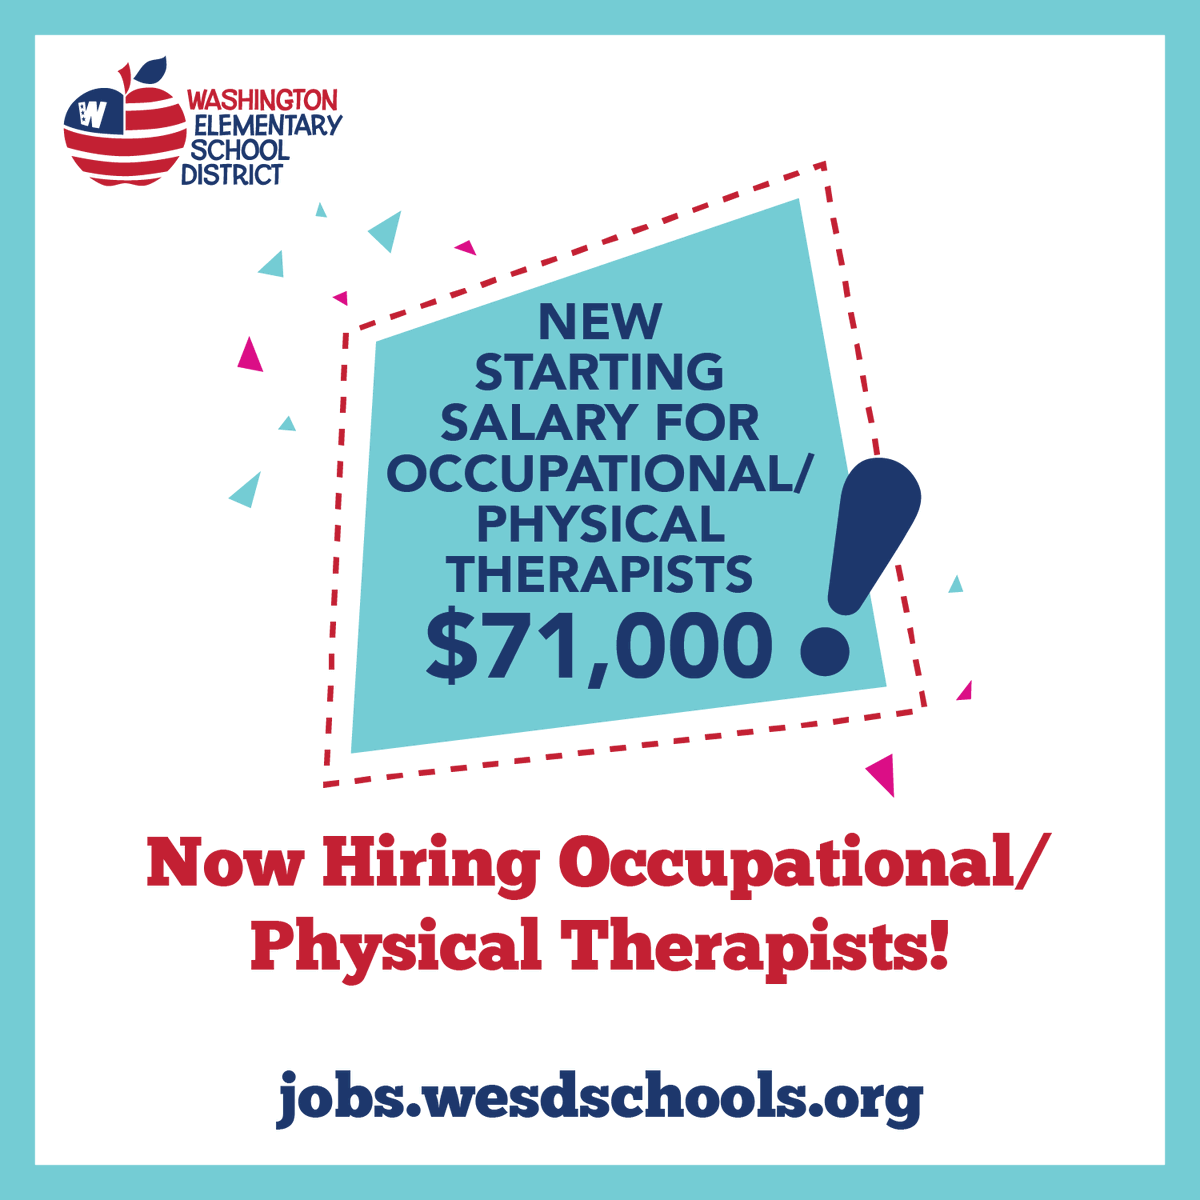 We are currently hiring occupational/physical therapists to join the #WESDFamily for the 23-24 school year! The WESD offers paid time off, employer-matched contributions to Arizona State Retirement, a new starting salary of $71,000 and much more! Apply at jobs.wesdschools.org.